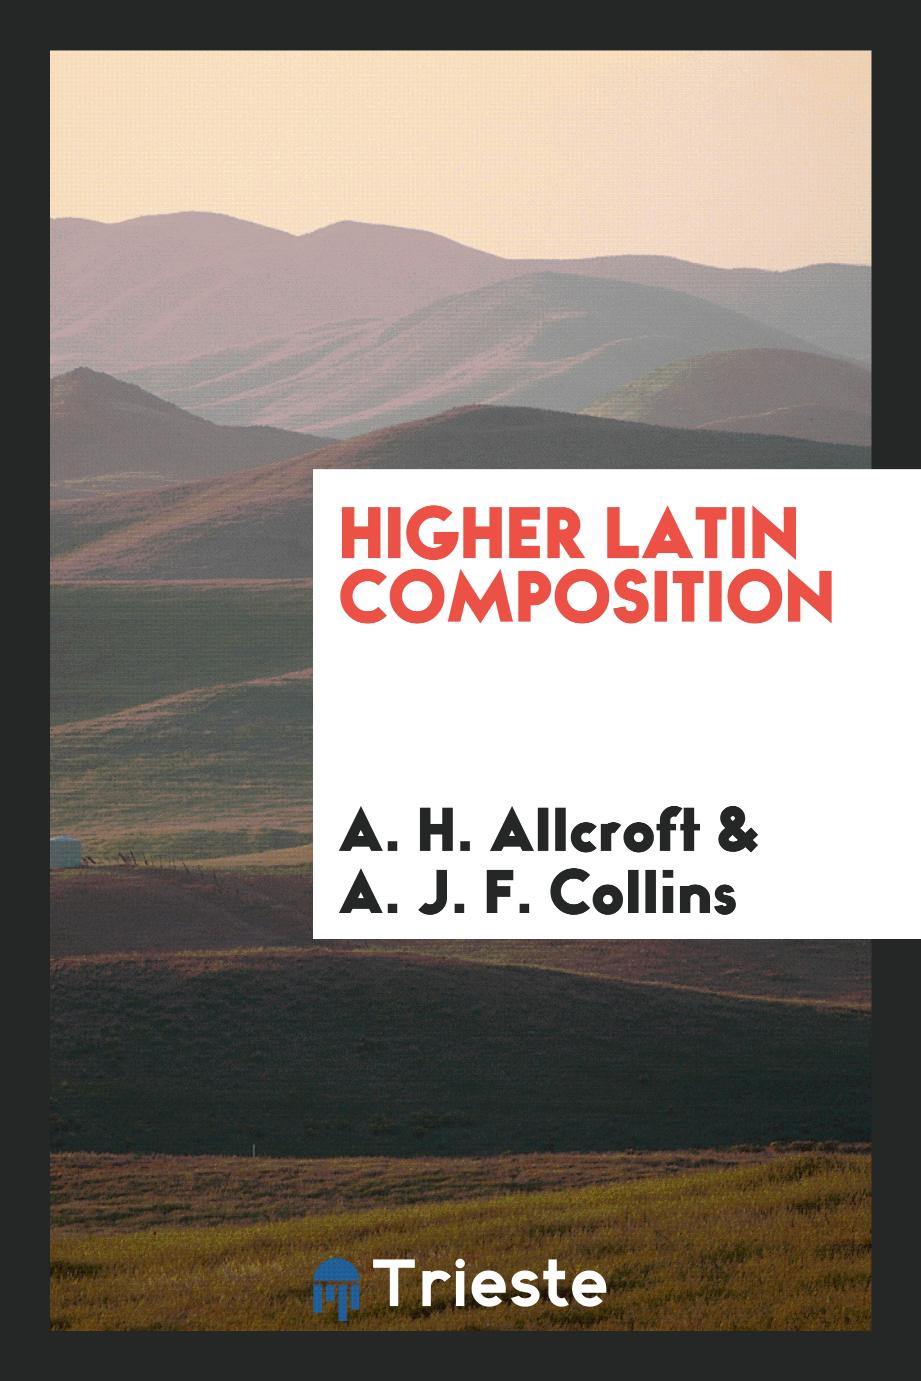 Higher Latin composition